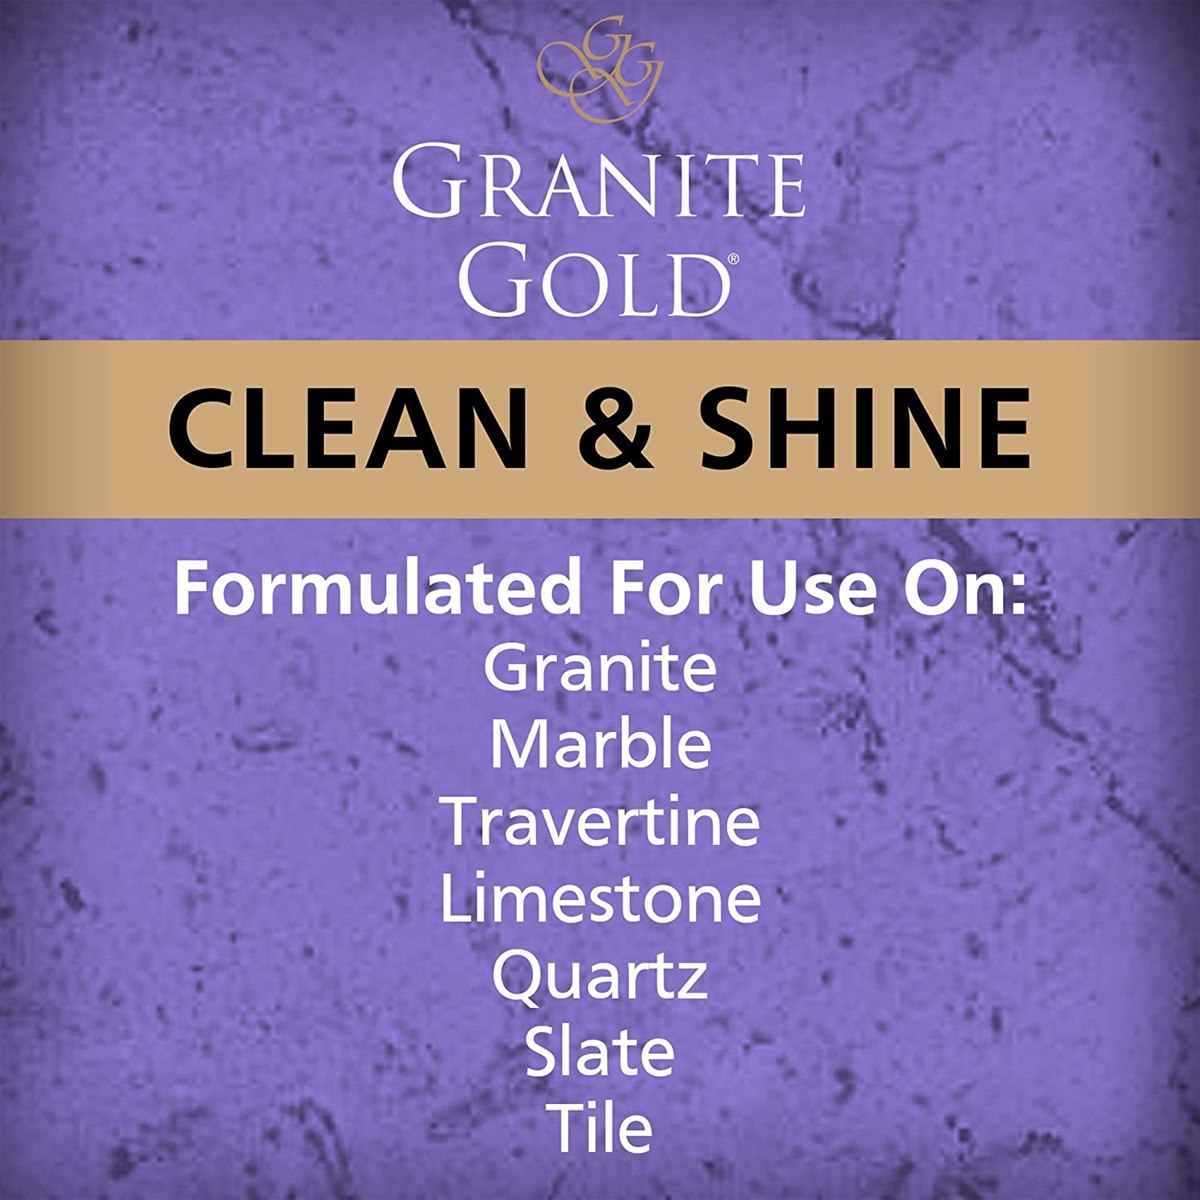 Where to Buy Granite Gold Clean and Shine Spray